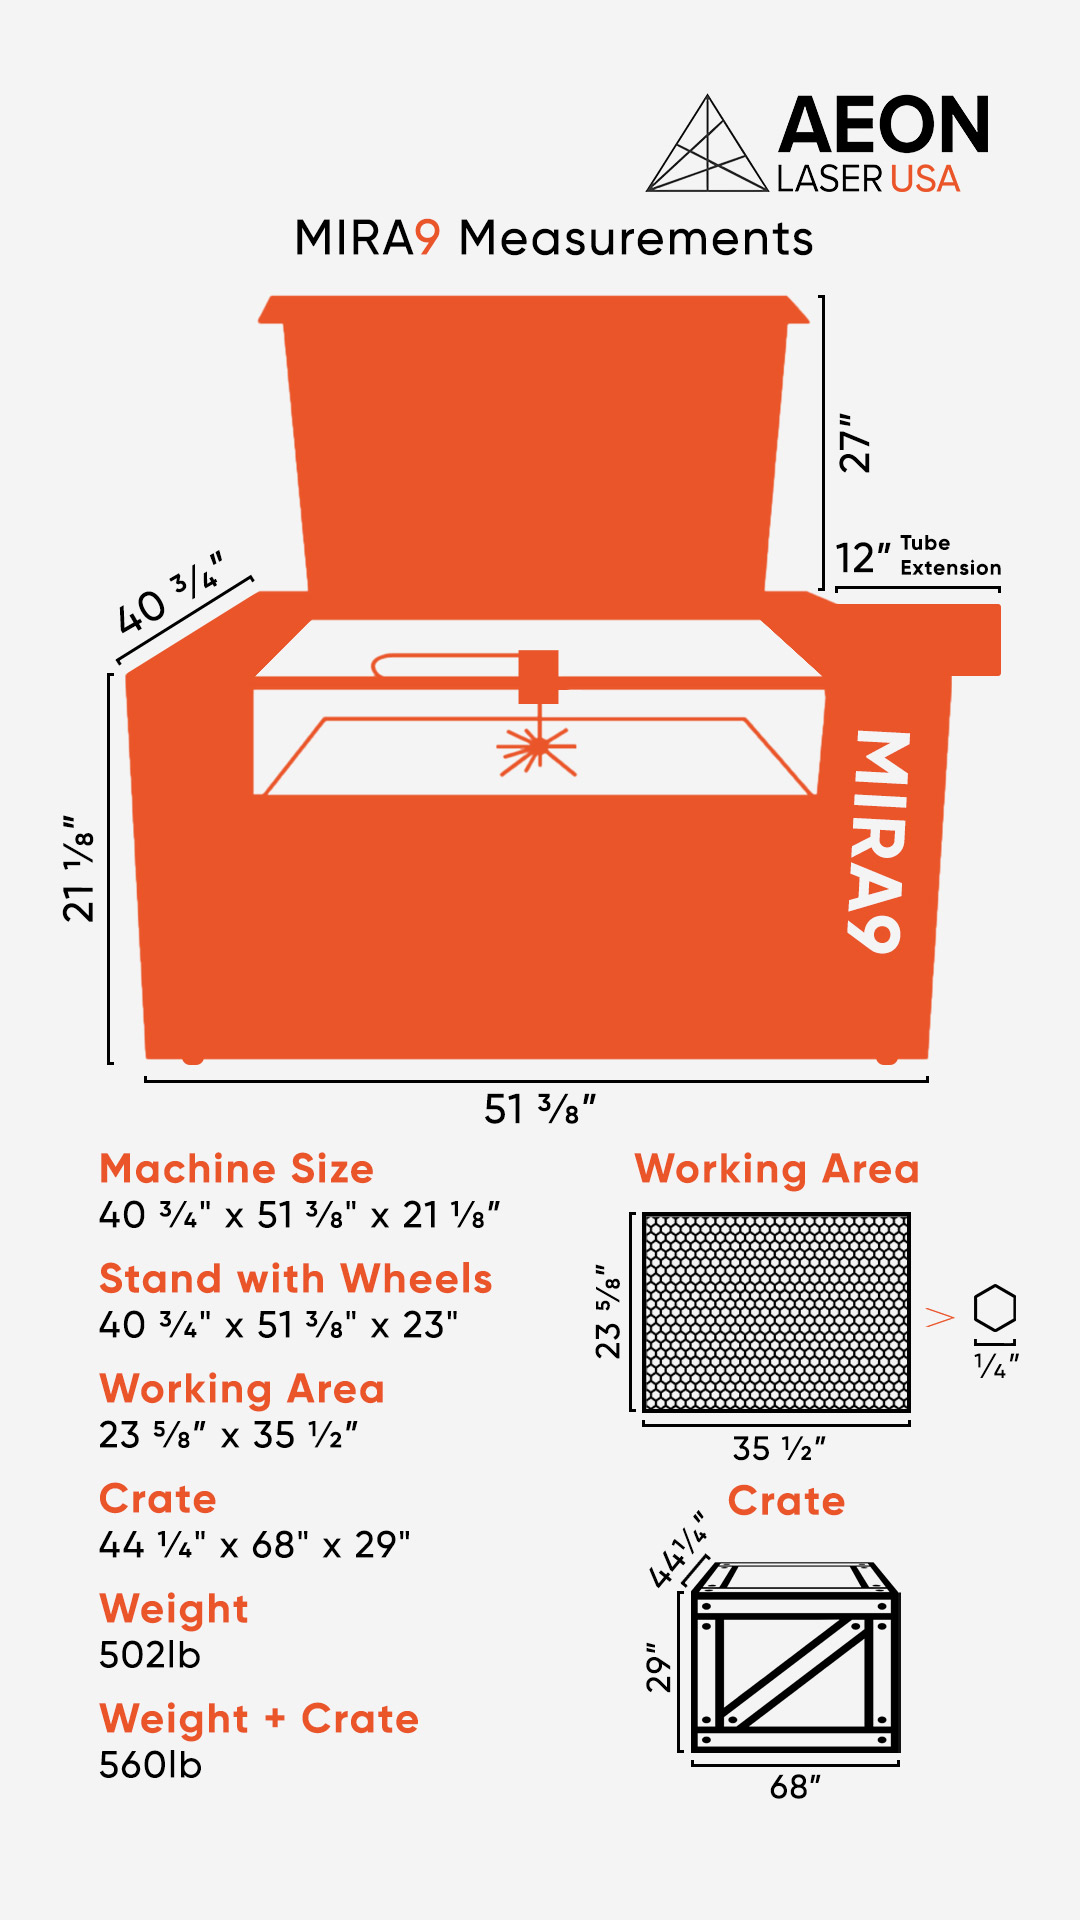 Graphic showing the dimensions of the Aeon MIRA 9 laser, crate size, and weight info